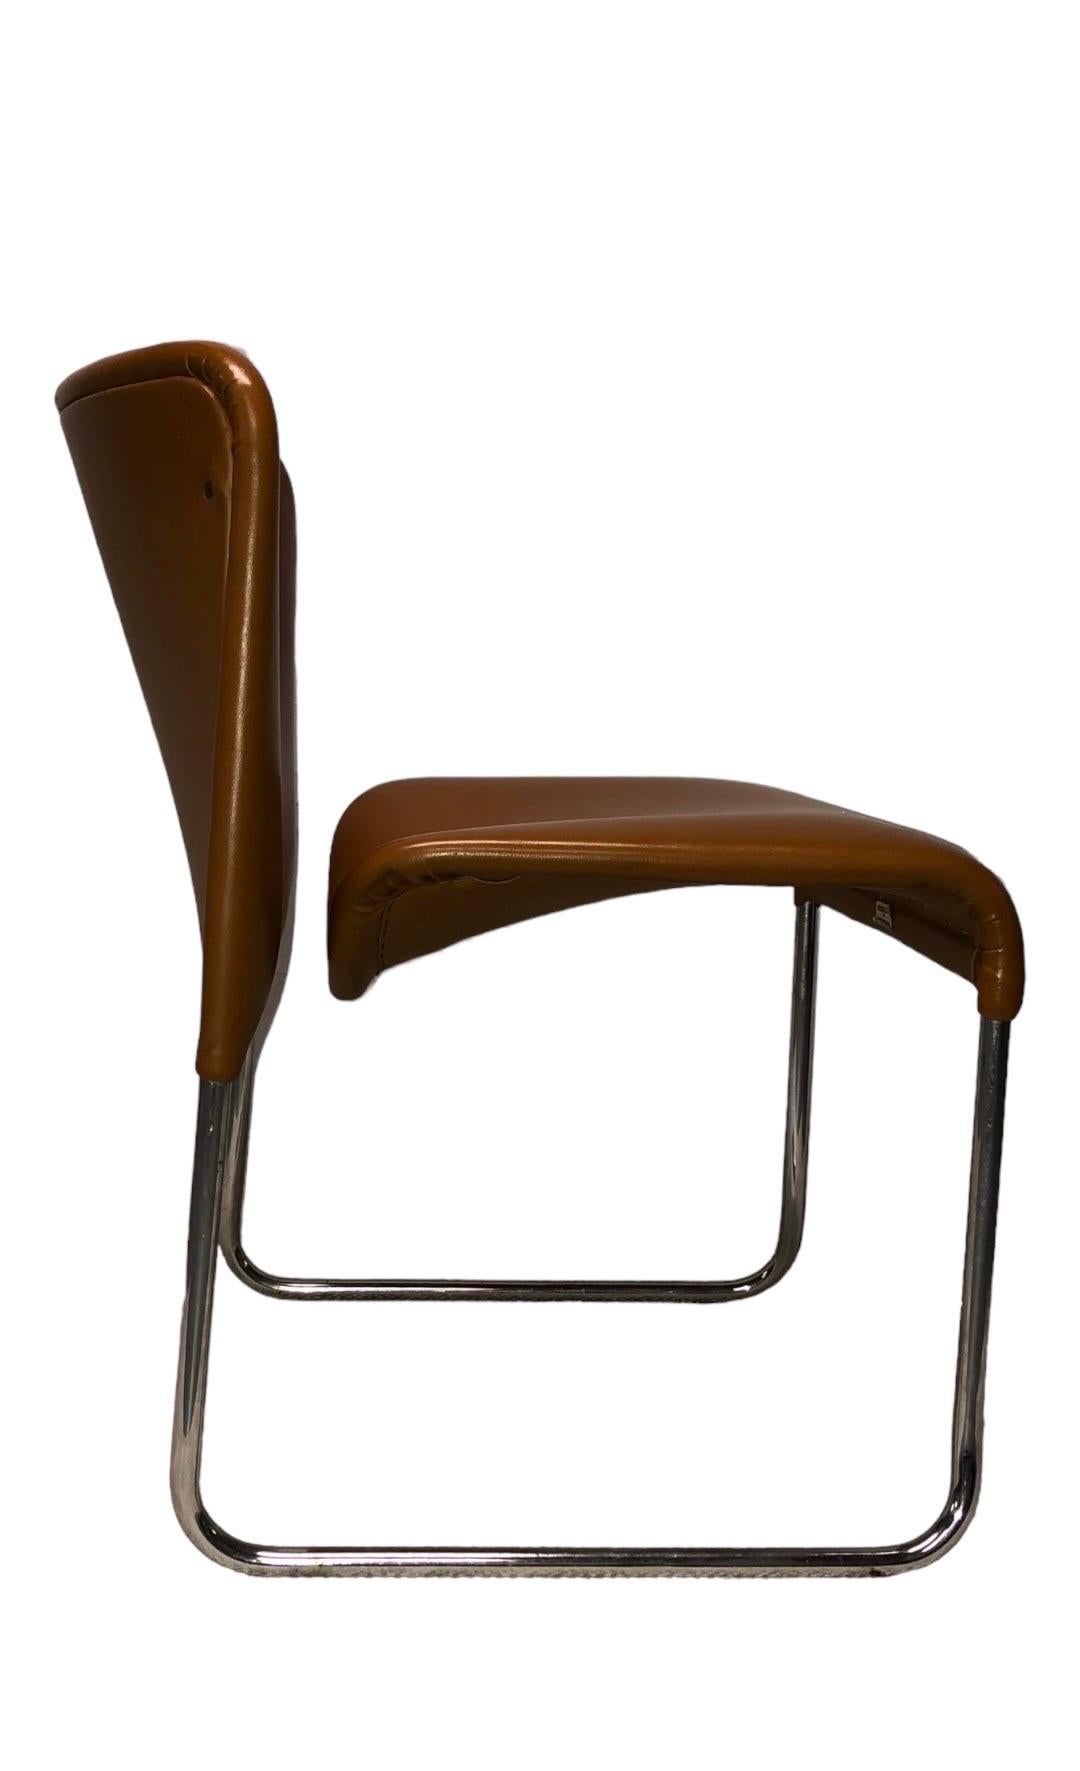 1970s Set of 6 Modern Dining Chairs by Marcello Cuneo for Mobel Italia -Stendig For Sale 2